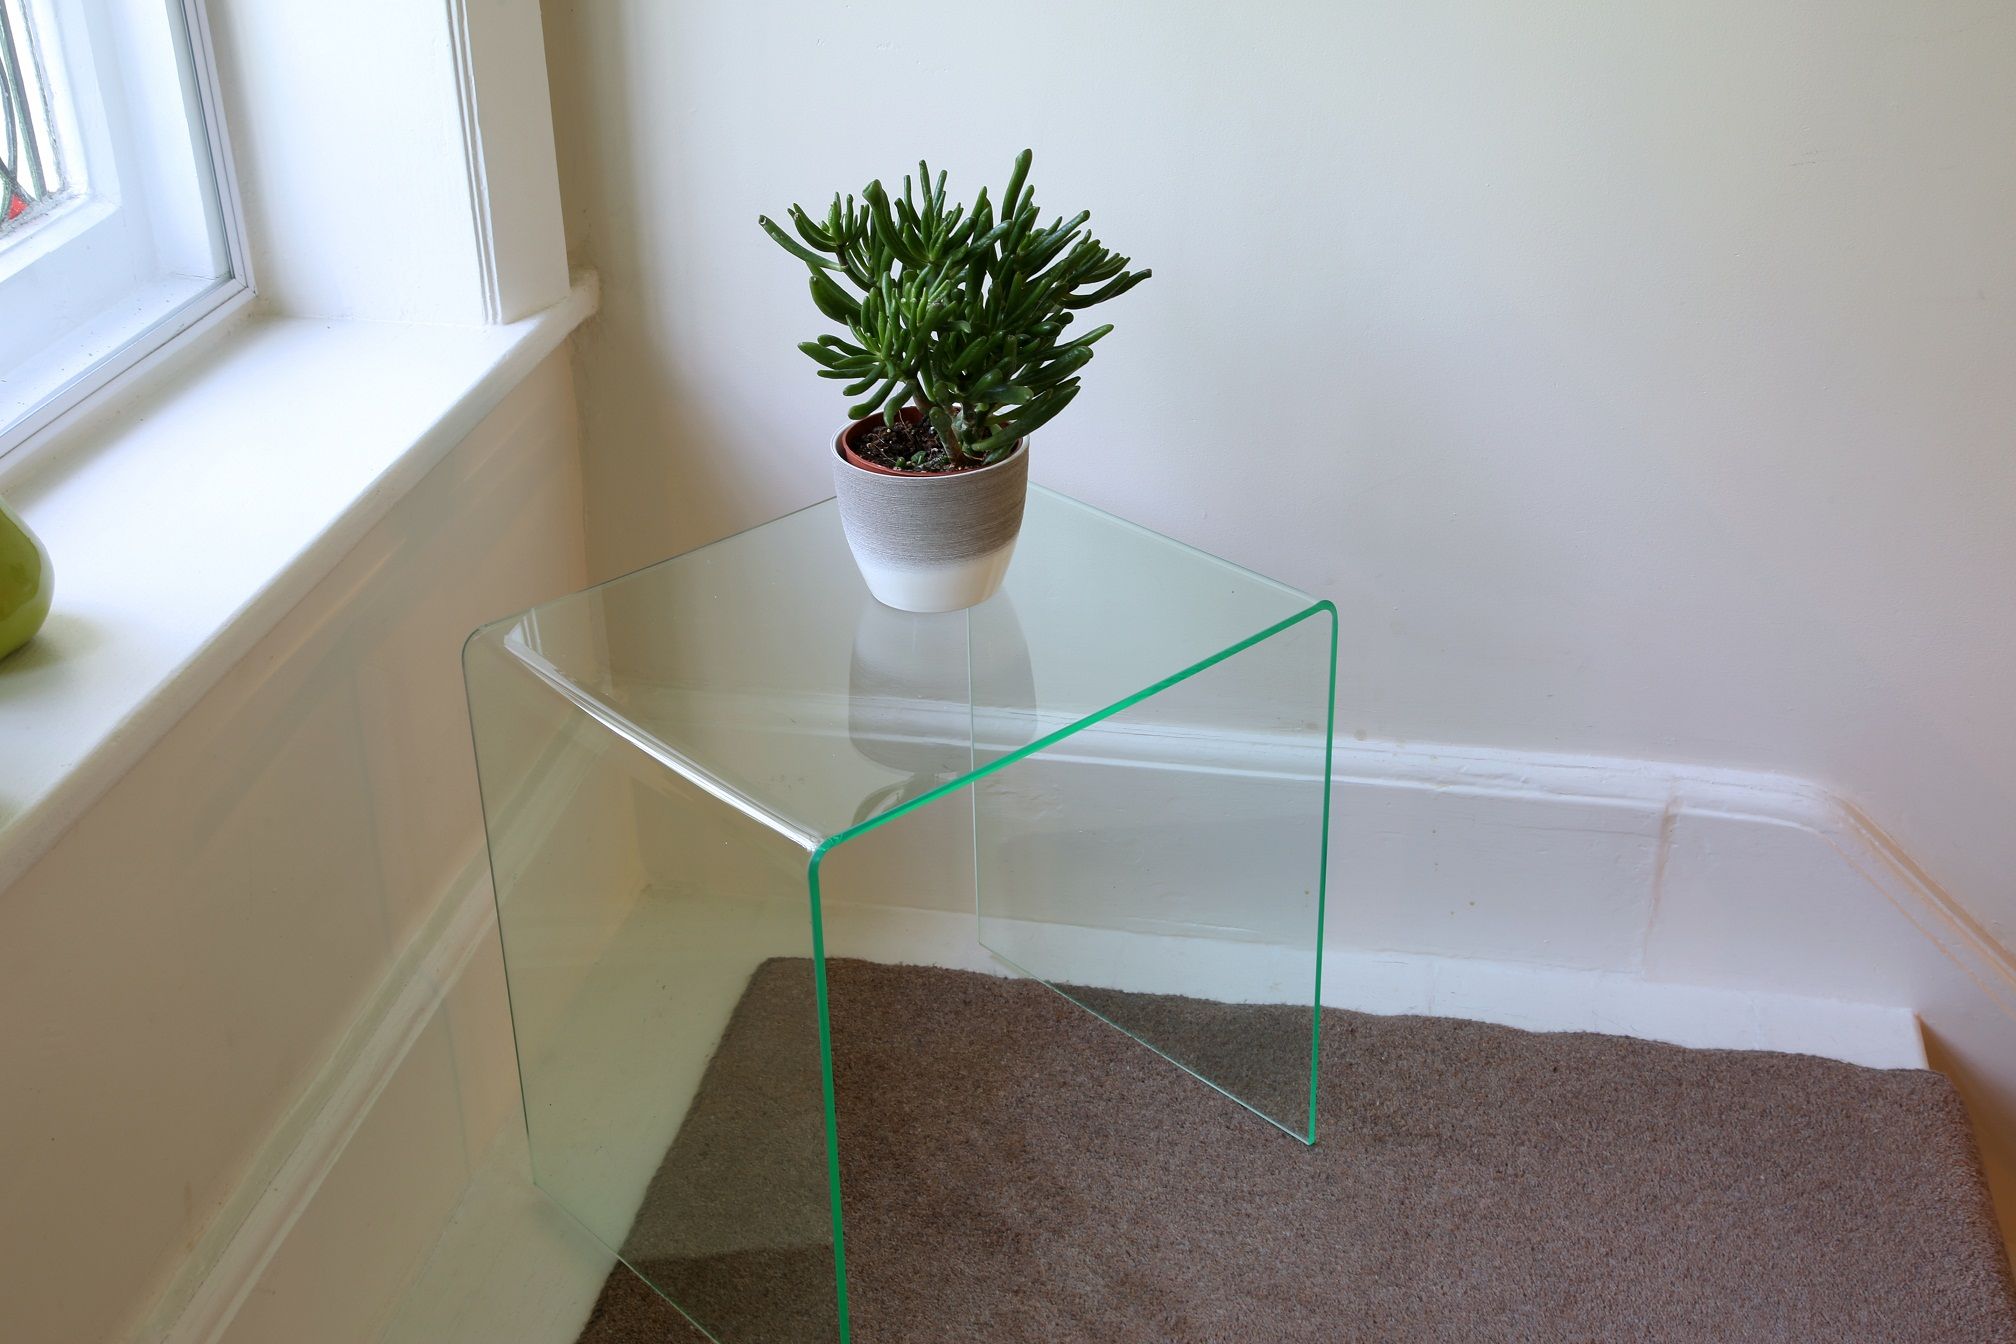 Acrylic Side Tables From Only £32 | Gb Madewrights Gpx Pertaining To Thick Acrylic Coffee Tables (View 20 of 20)